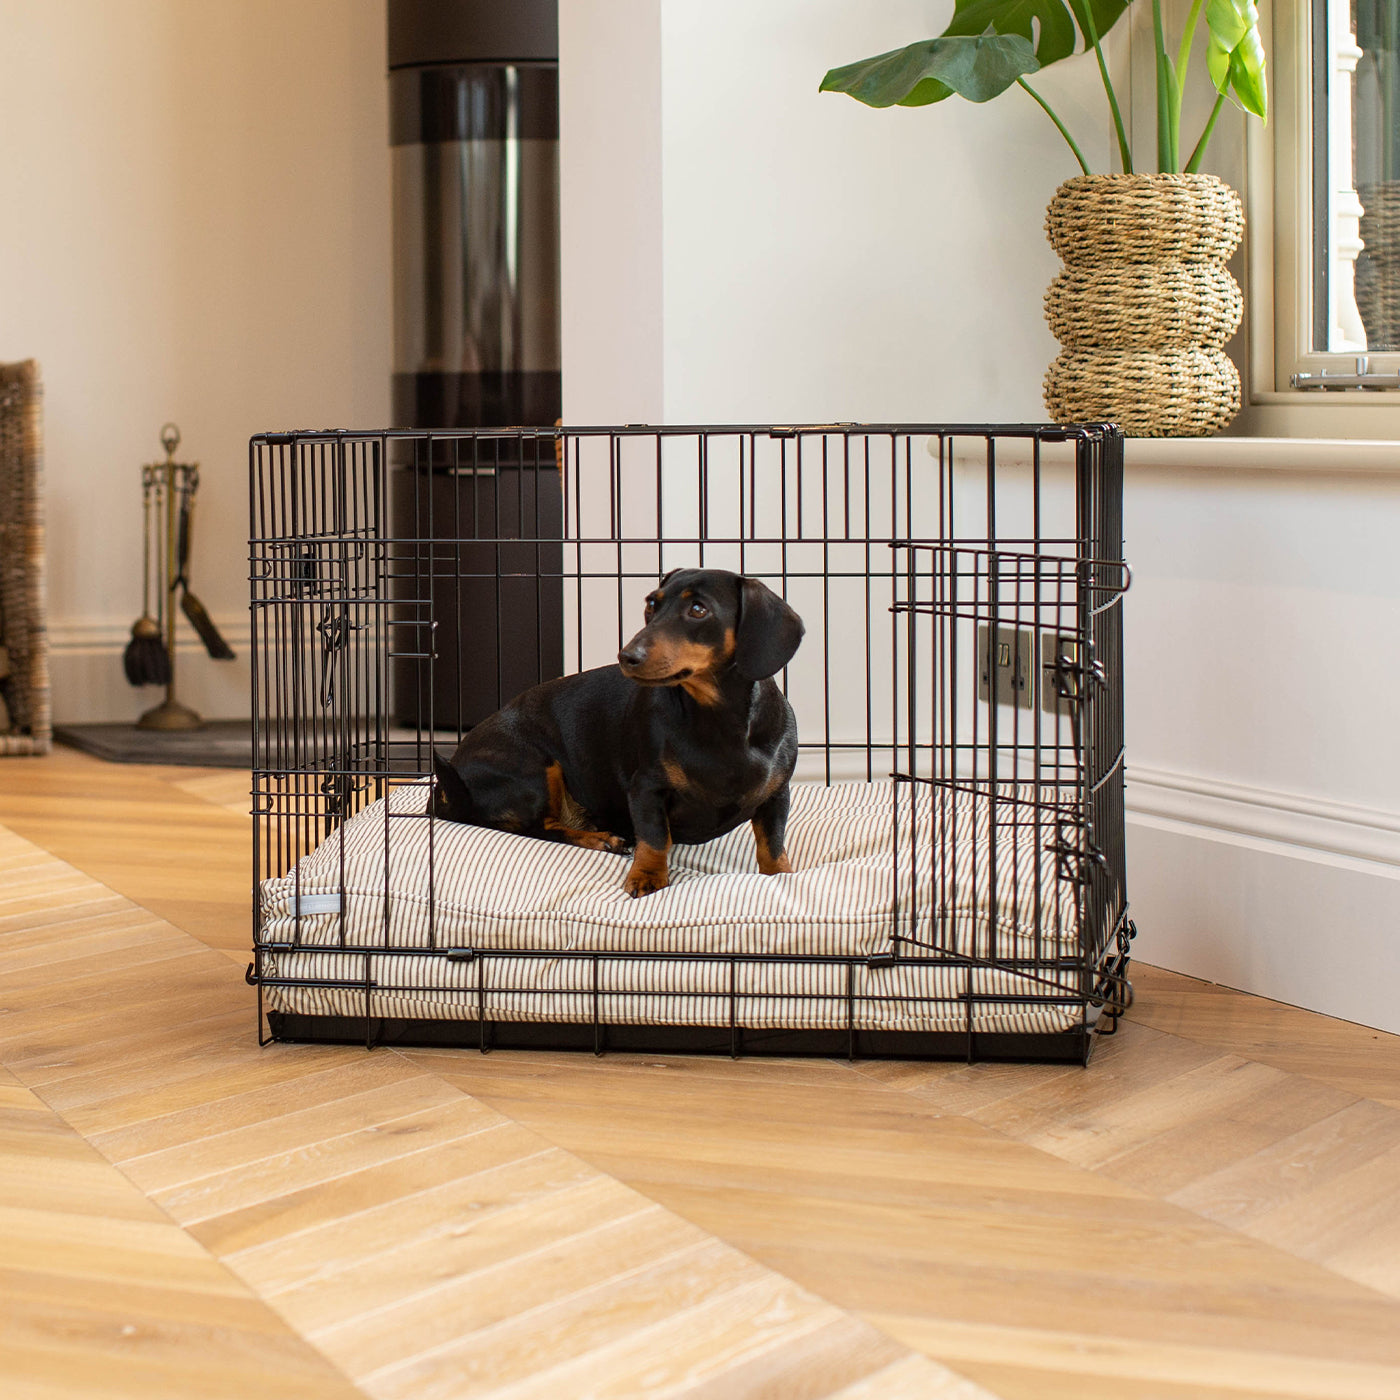 Luxury Heavy Duty Dog Crate, In Stunning Regency Stripe Crate Set Cushion, The Perfect Dog Crate Set For Building The Ultimate Pet Den! Dog Crate Cover Available To Personalise at Lords & Labradors